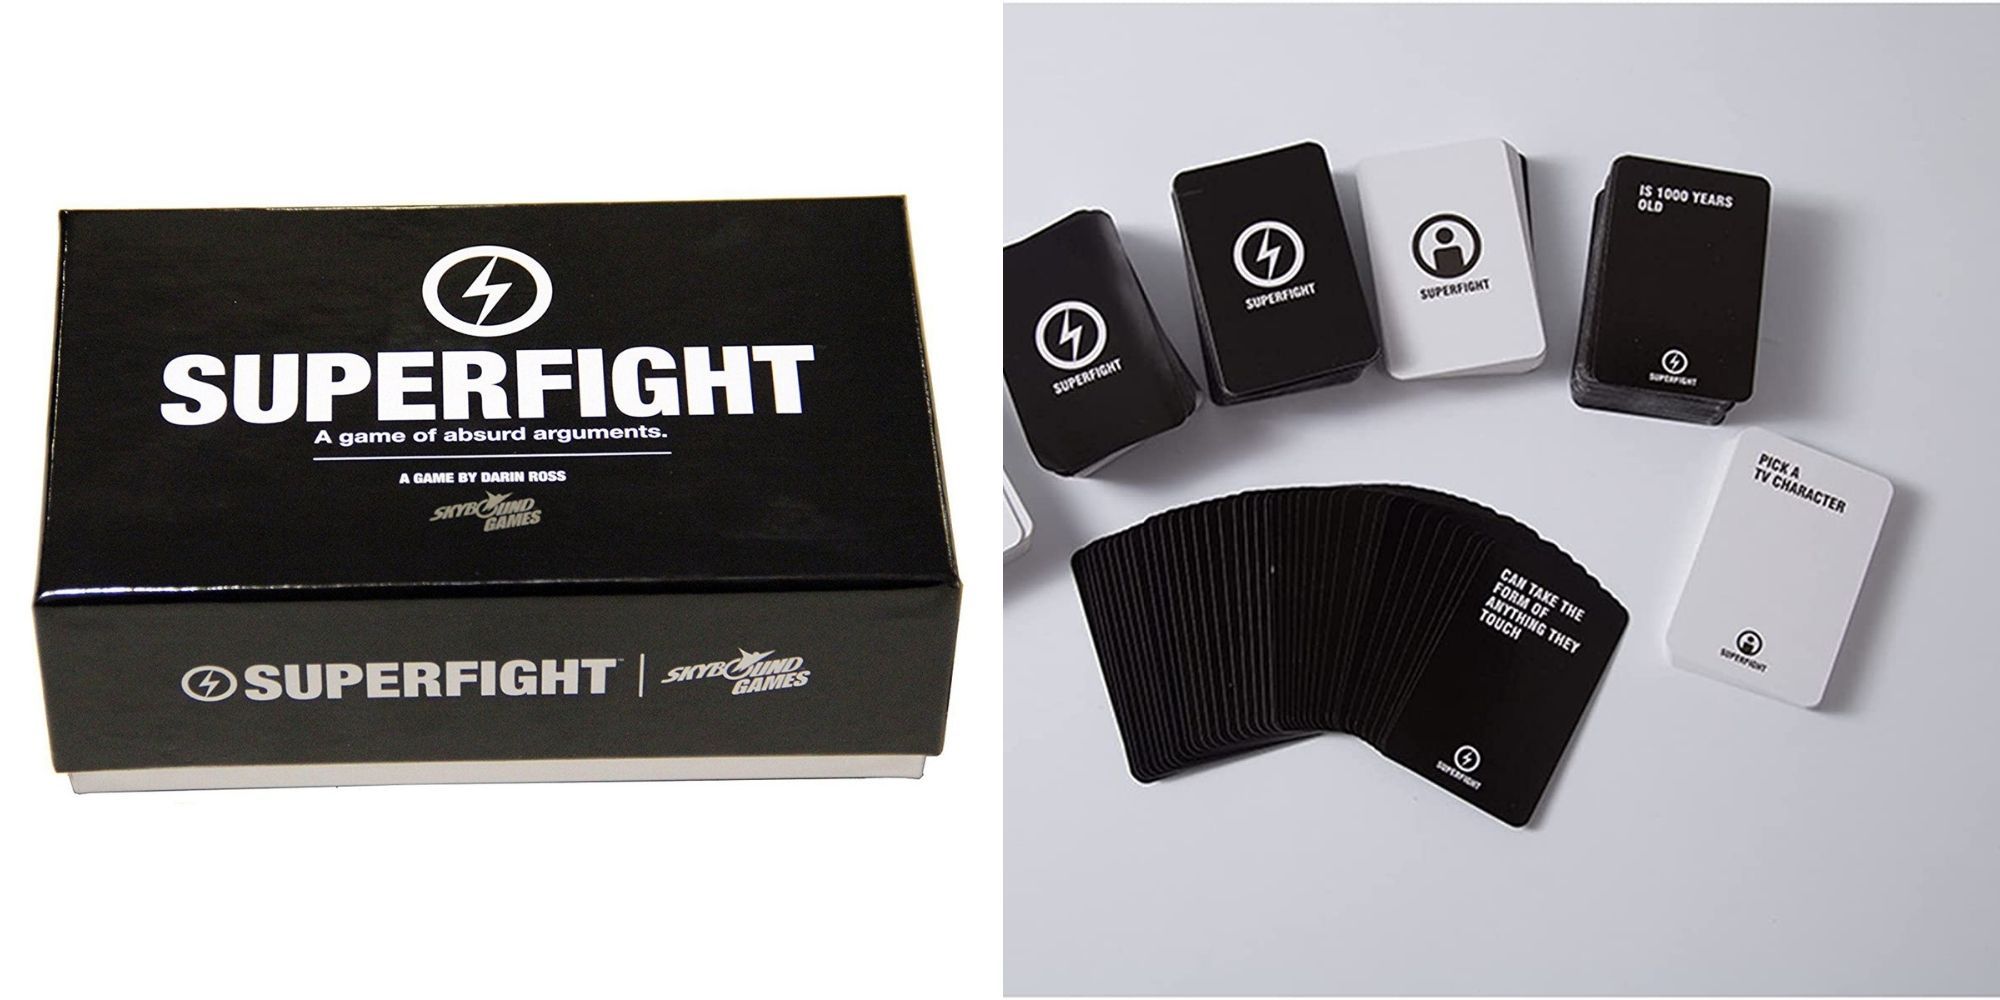 Super Fight - Card Game Box - The Cards with examples of the content